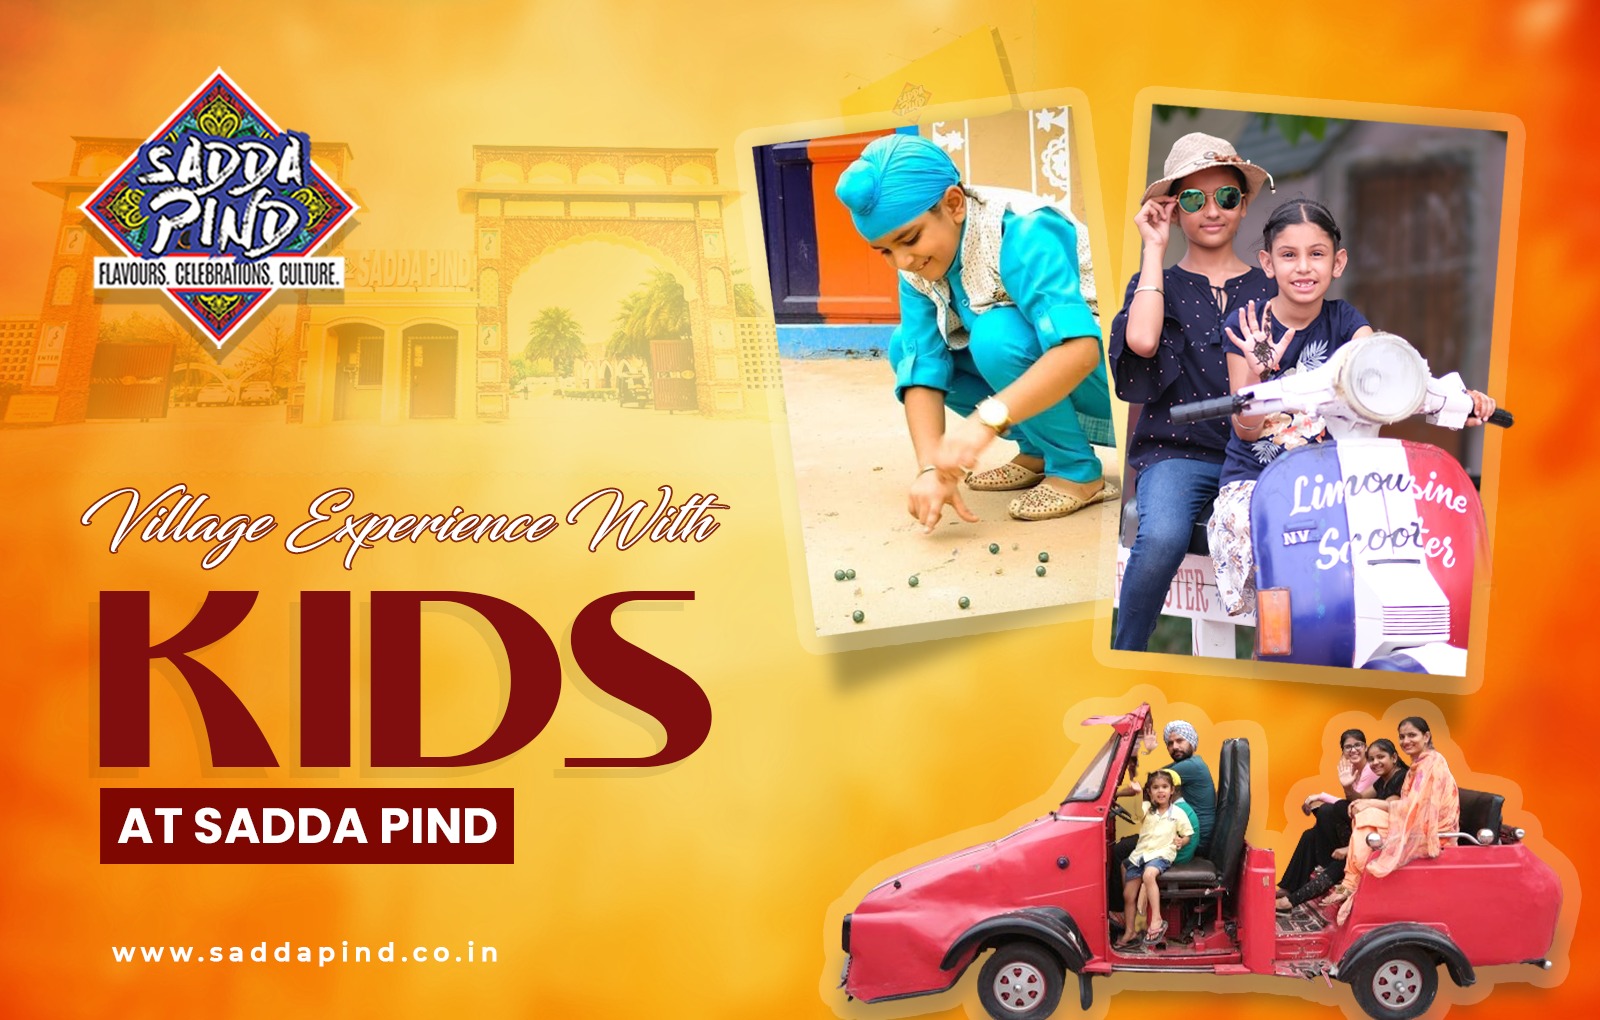 Reliving the Village Experience: Family Adventures with Kids at Sadda Pind
